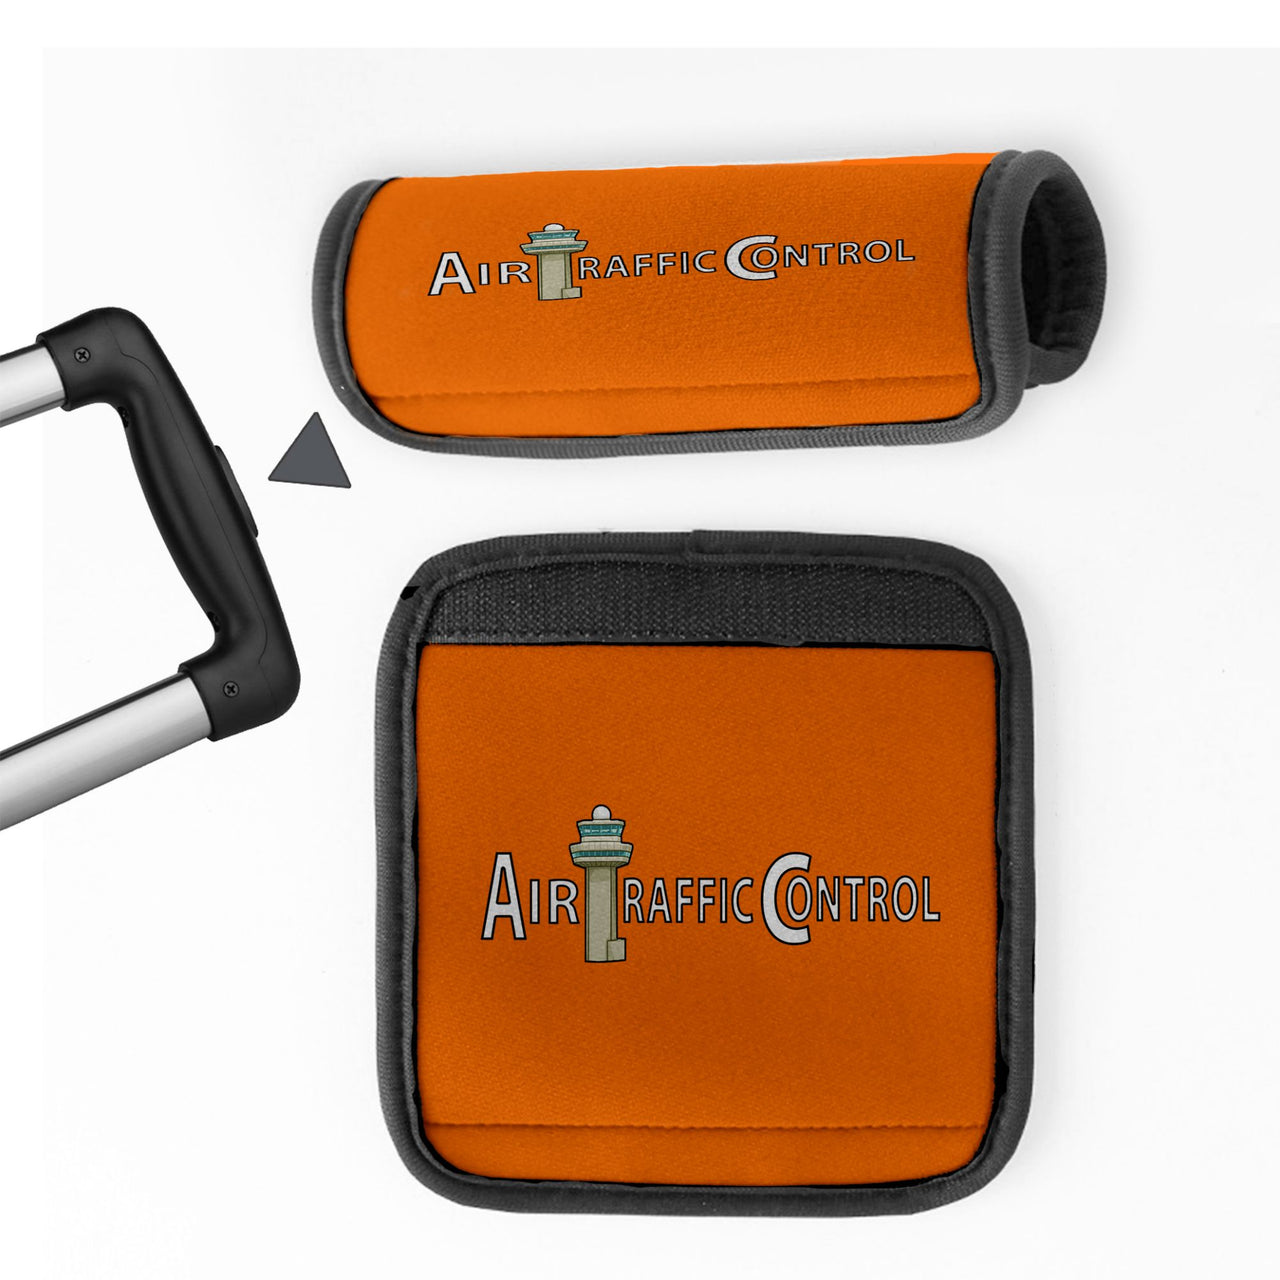 Air Traffic Control Designed Neoprene Luggage Handle Covers